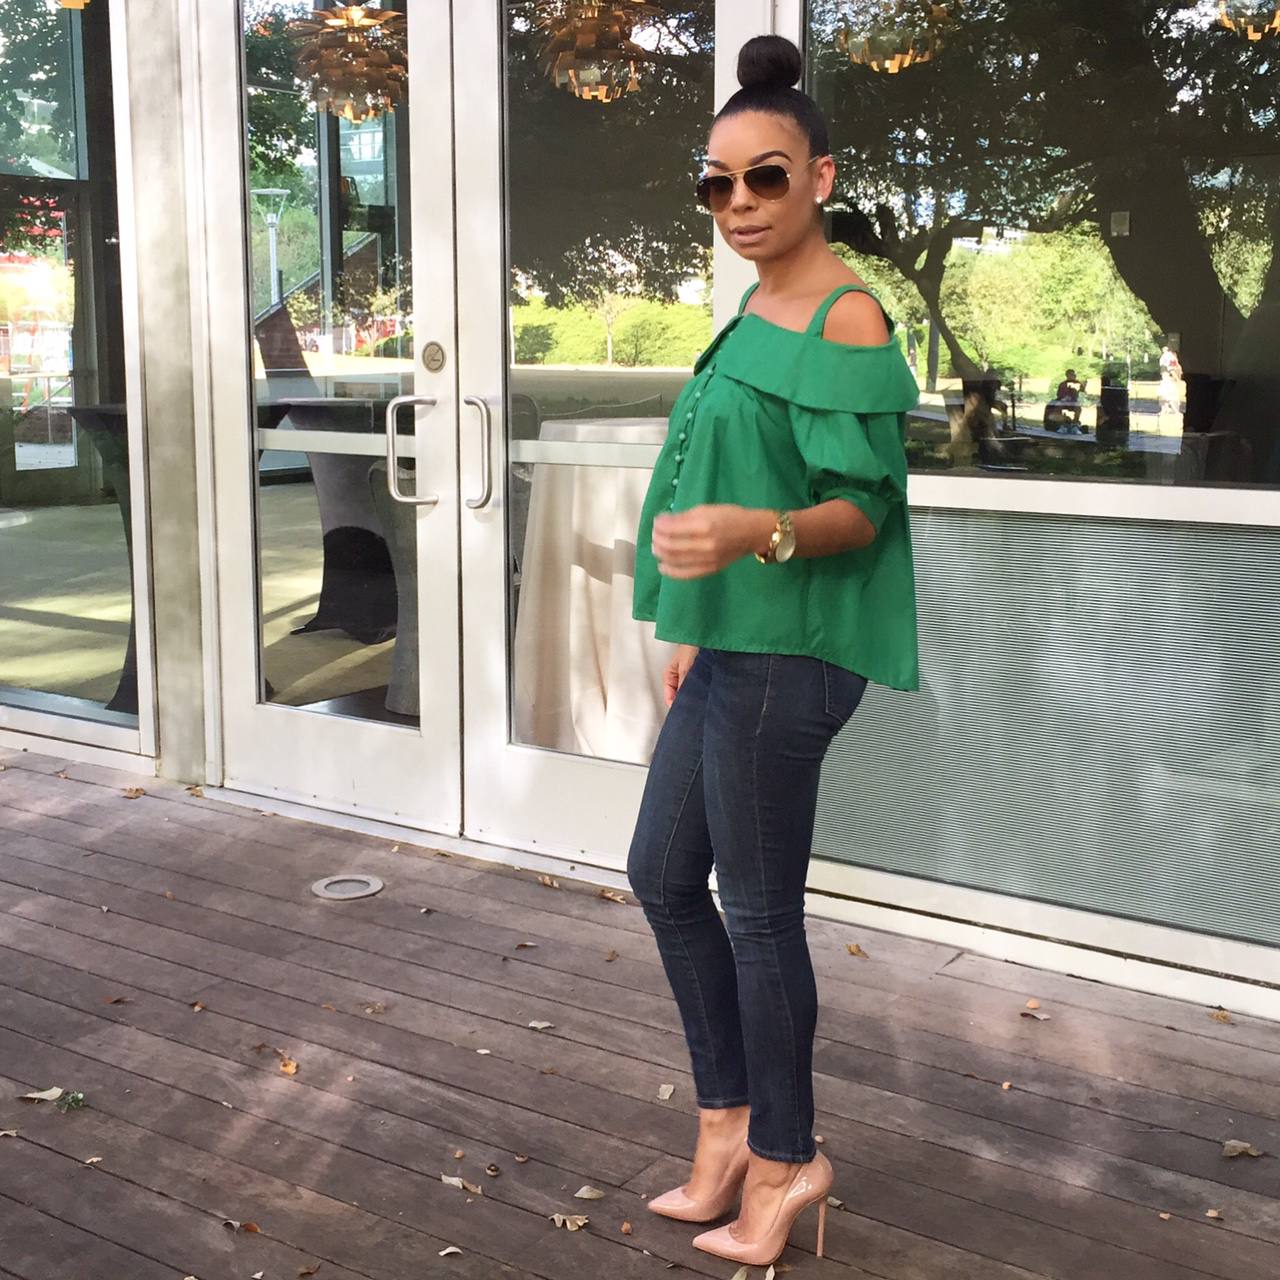 Green Off the Shoulder Shirt Denim and Christian Louboutin Pigalle Pumps